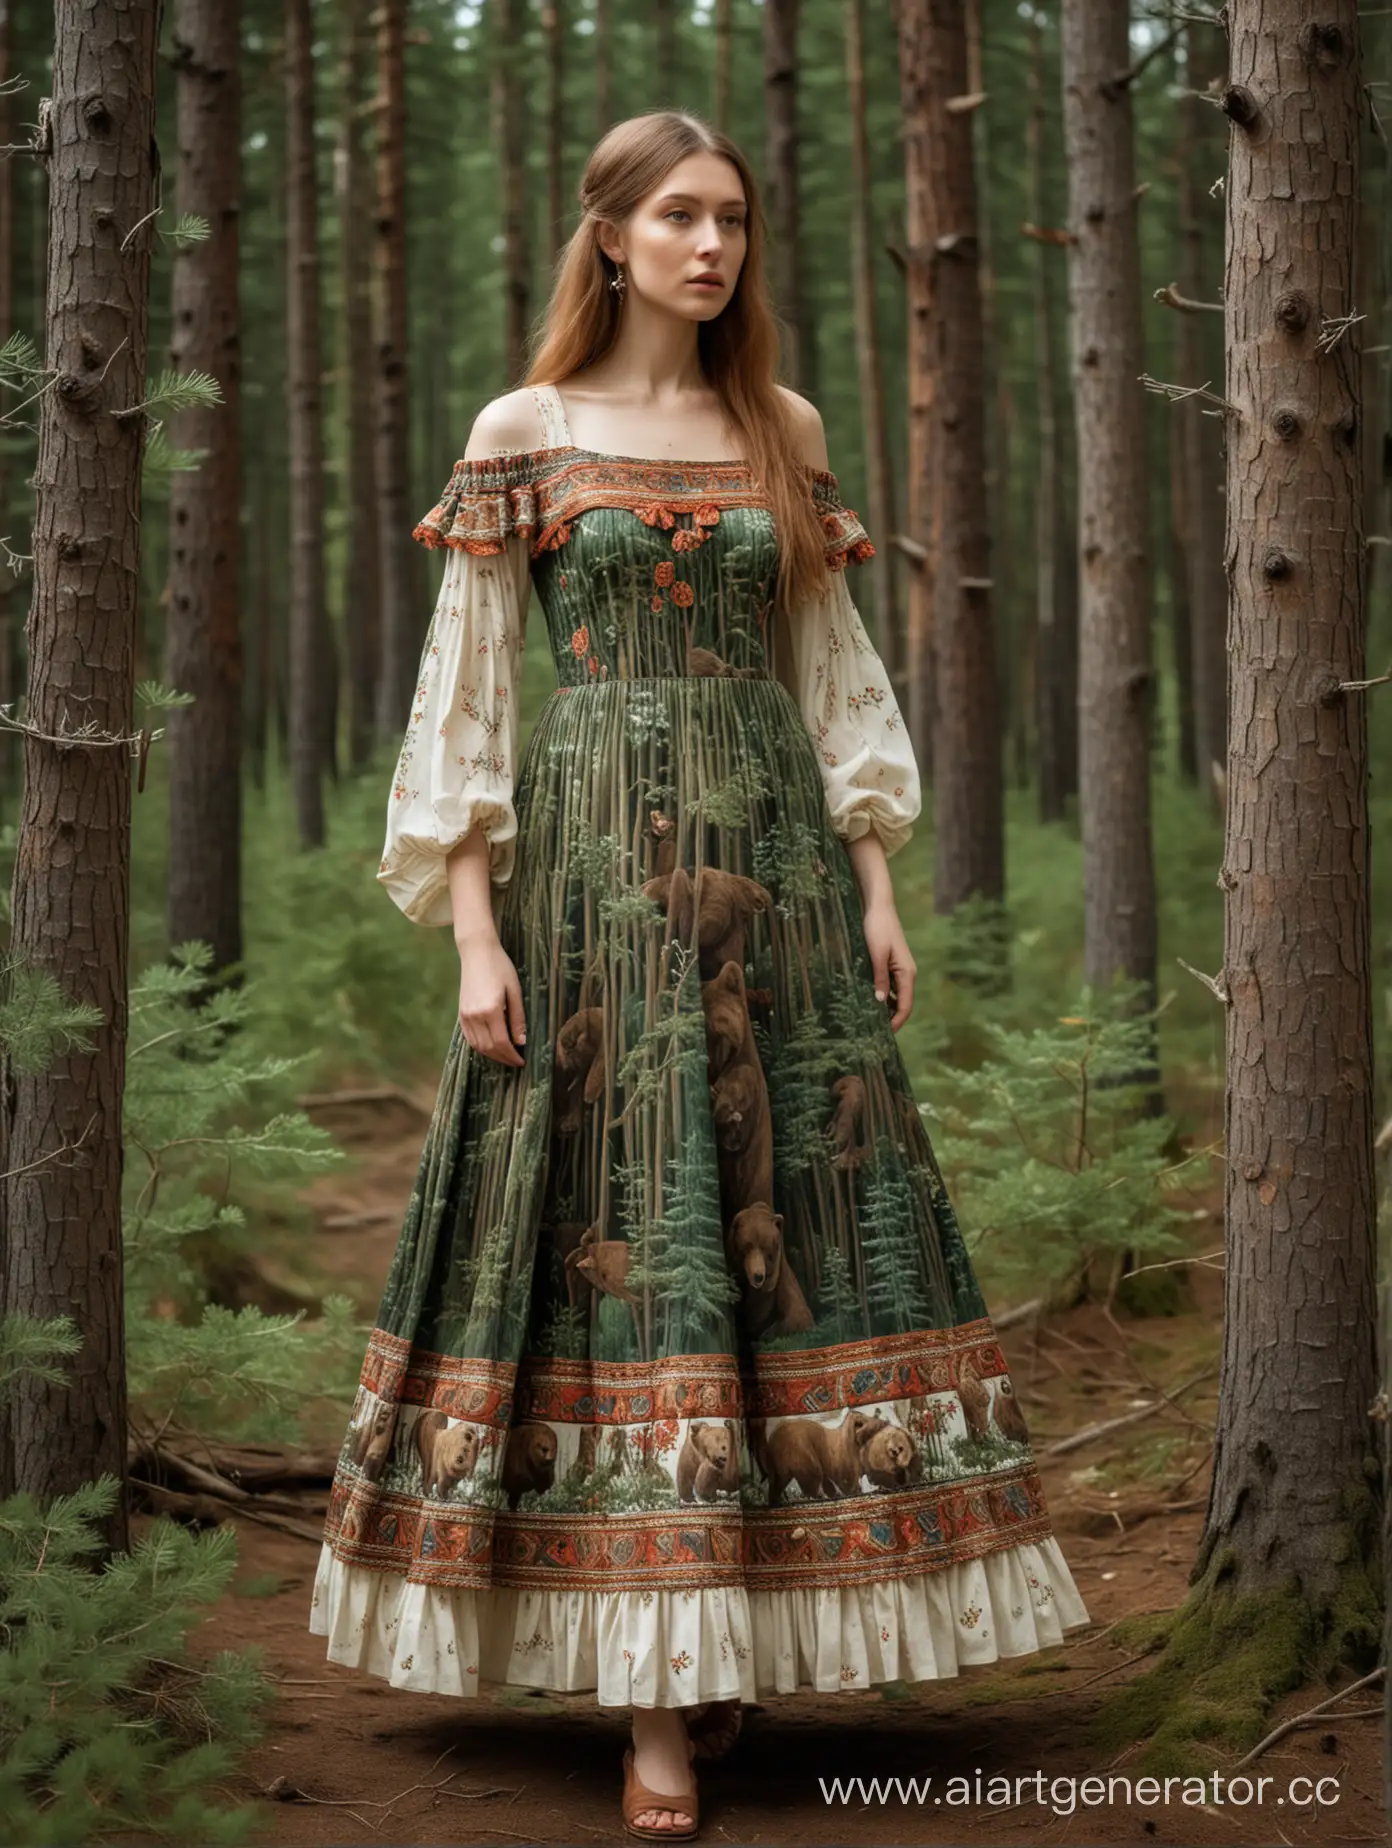 A model in a dress inspired by Vasnetsov's painting of a Bear in a pine forest